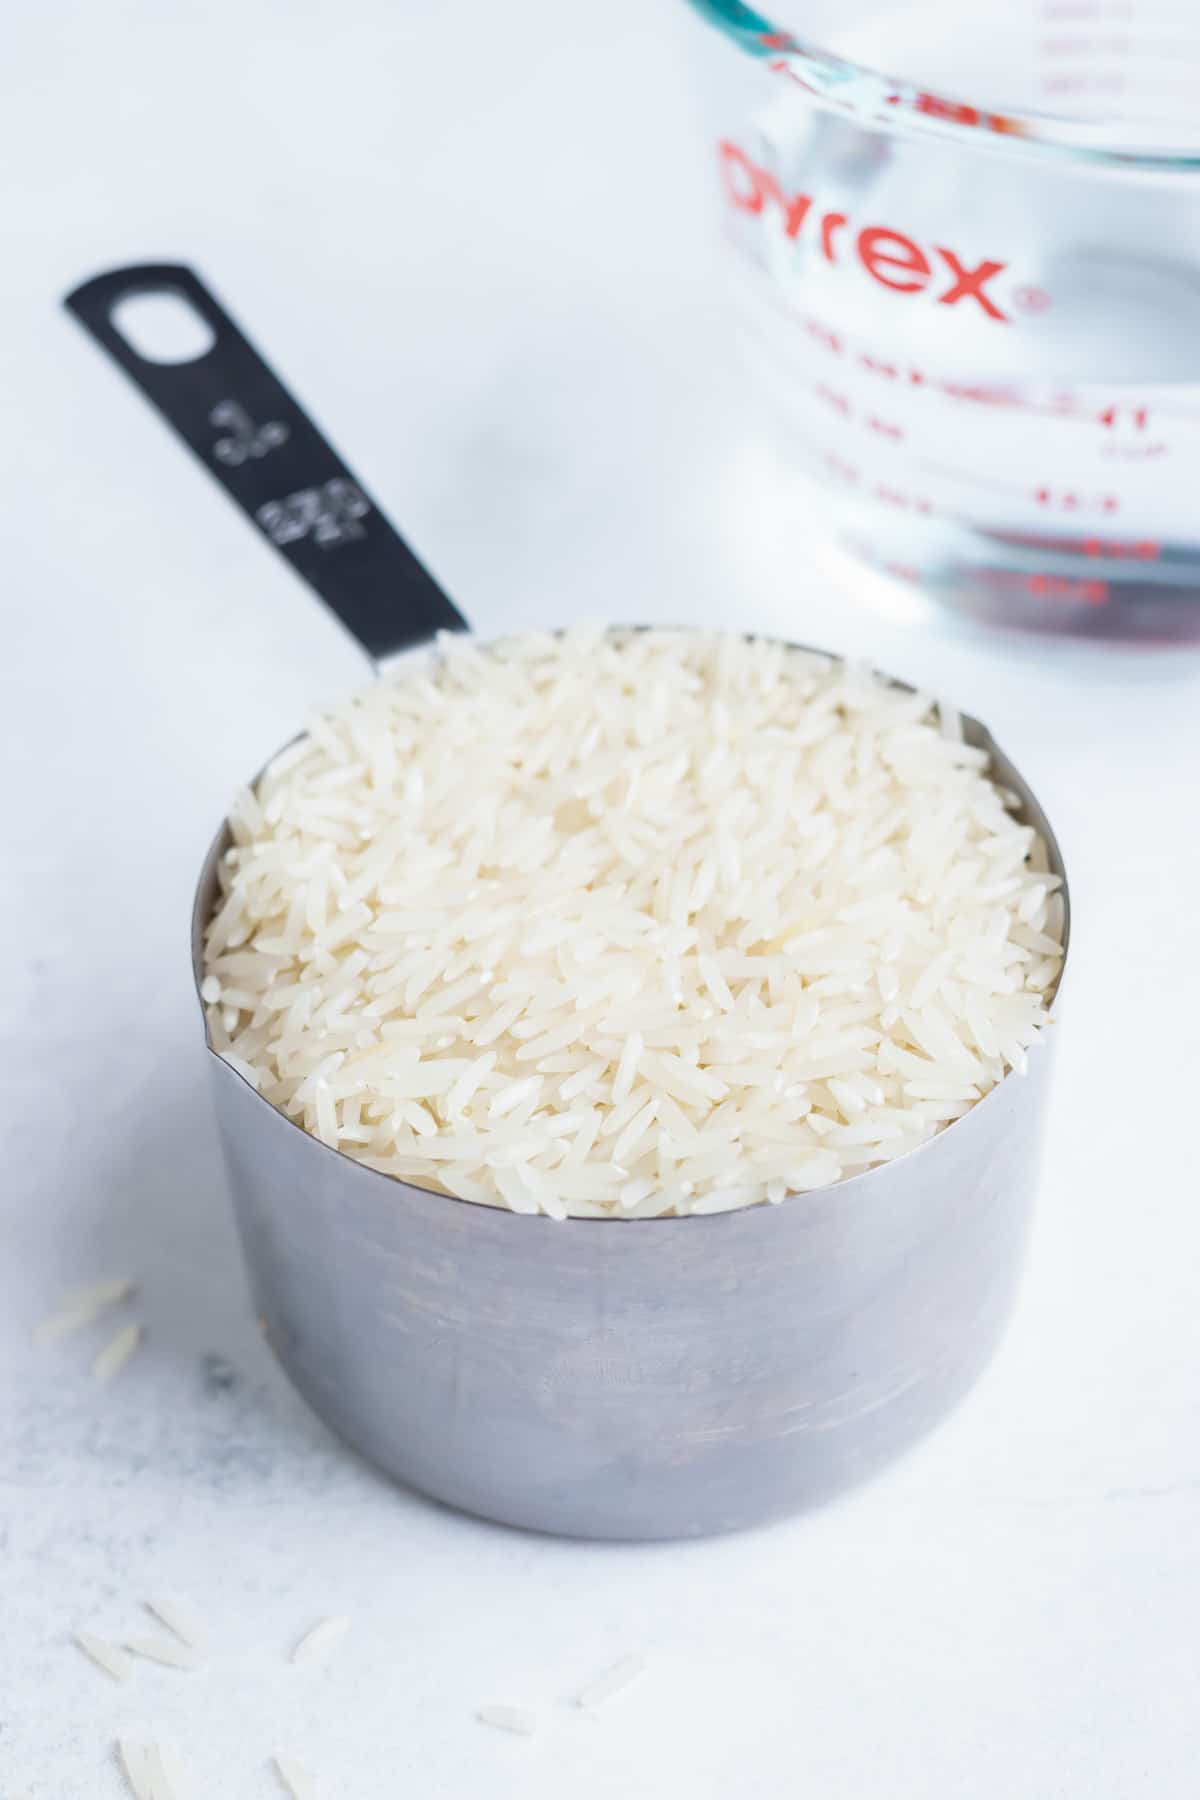 Dried rice filling a metal measuring cup.